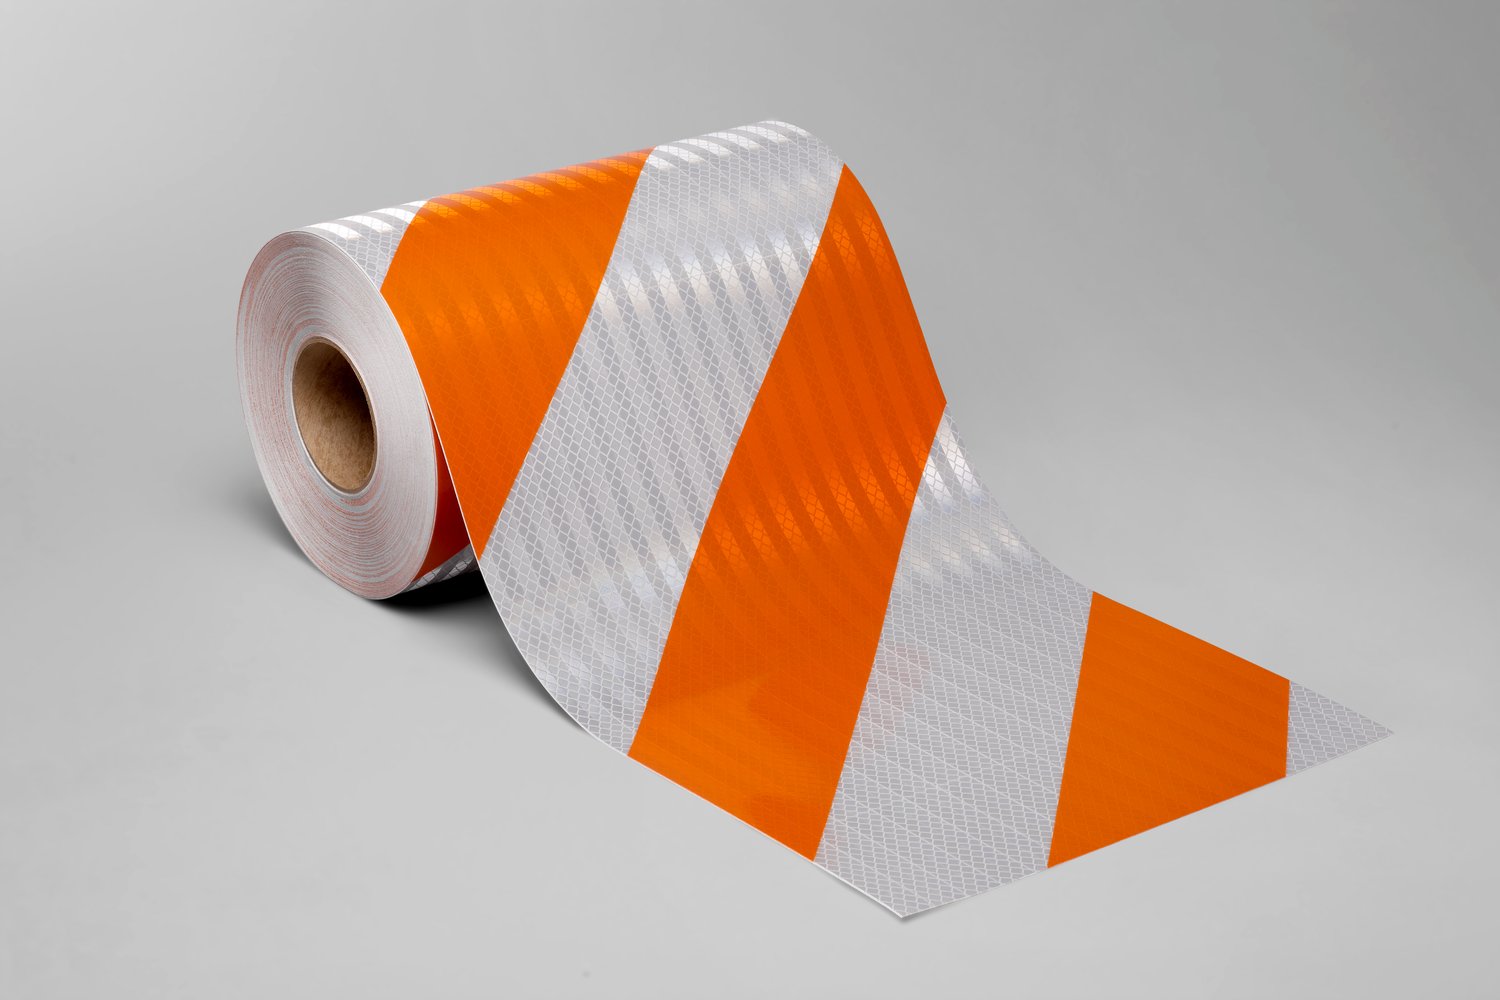 7010535235 - 3M Flexible Prismatic Reflective Barricade Sheeting 3336R Orange/White, 6 in stripe/right, 6 in x 50 yd